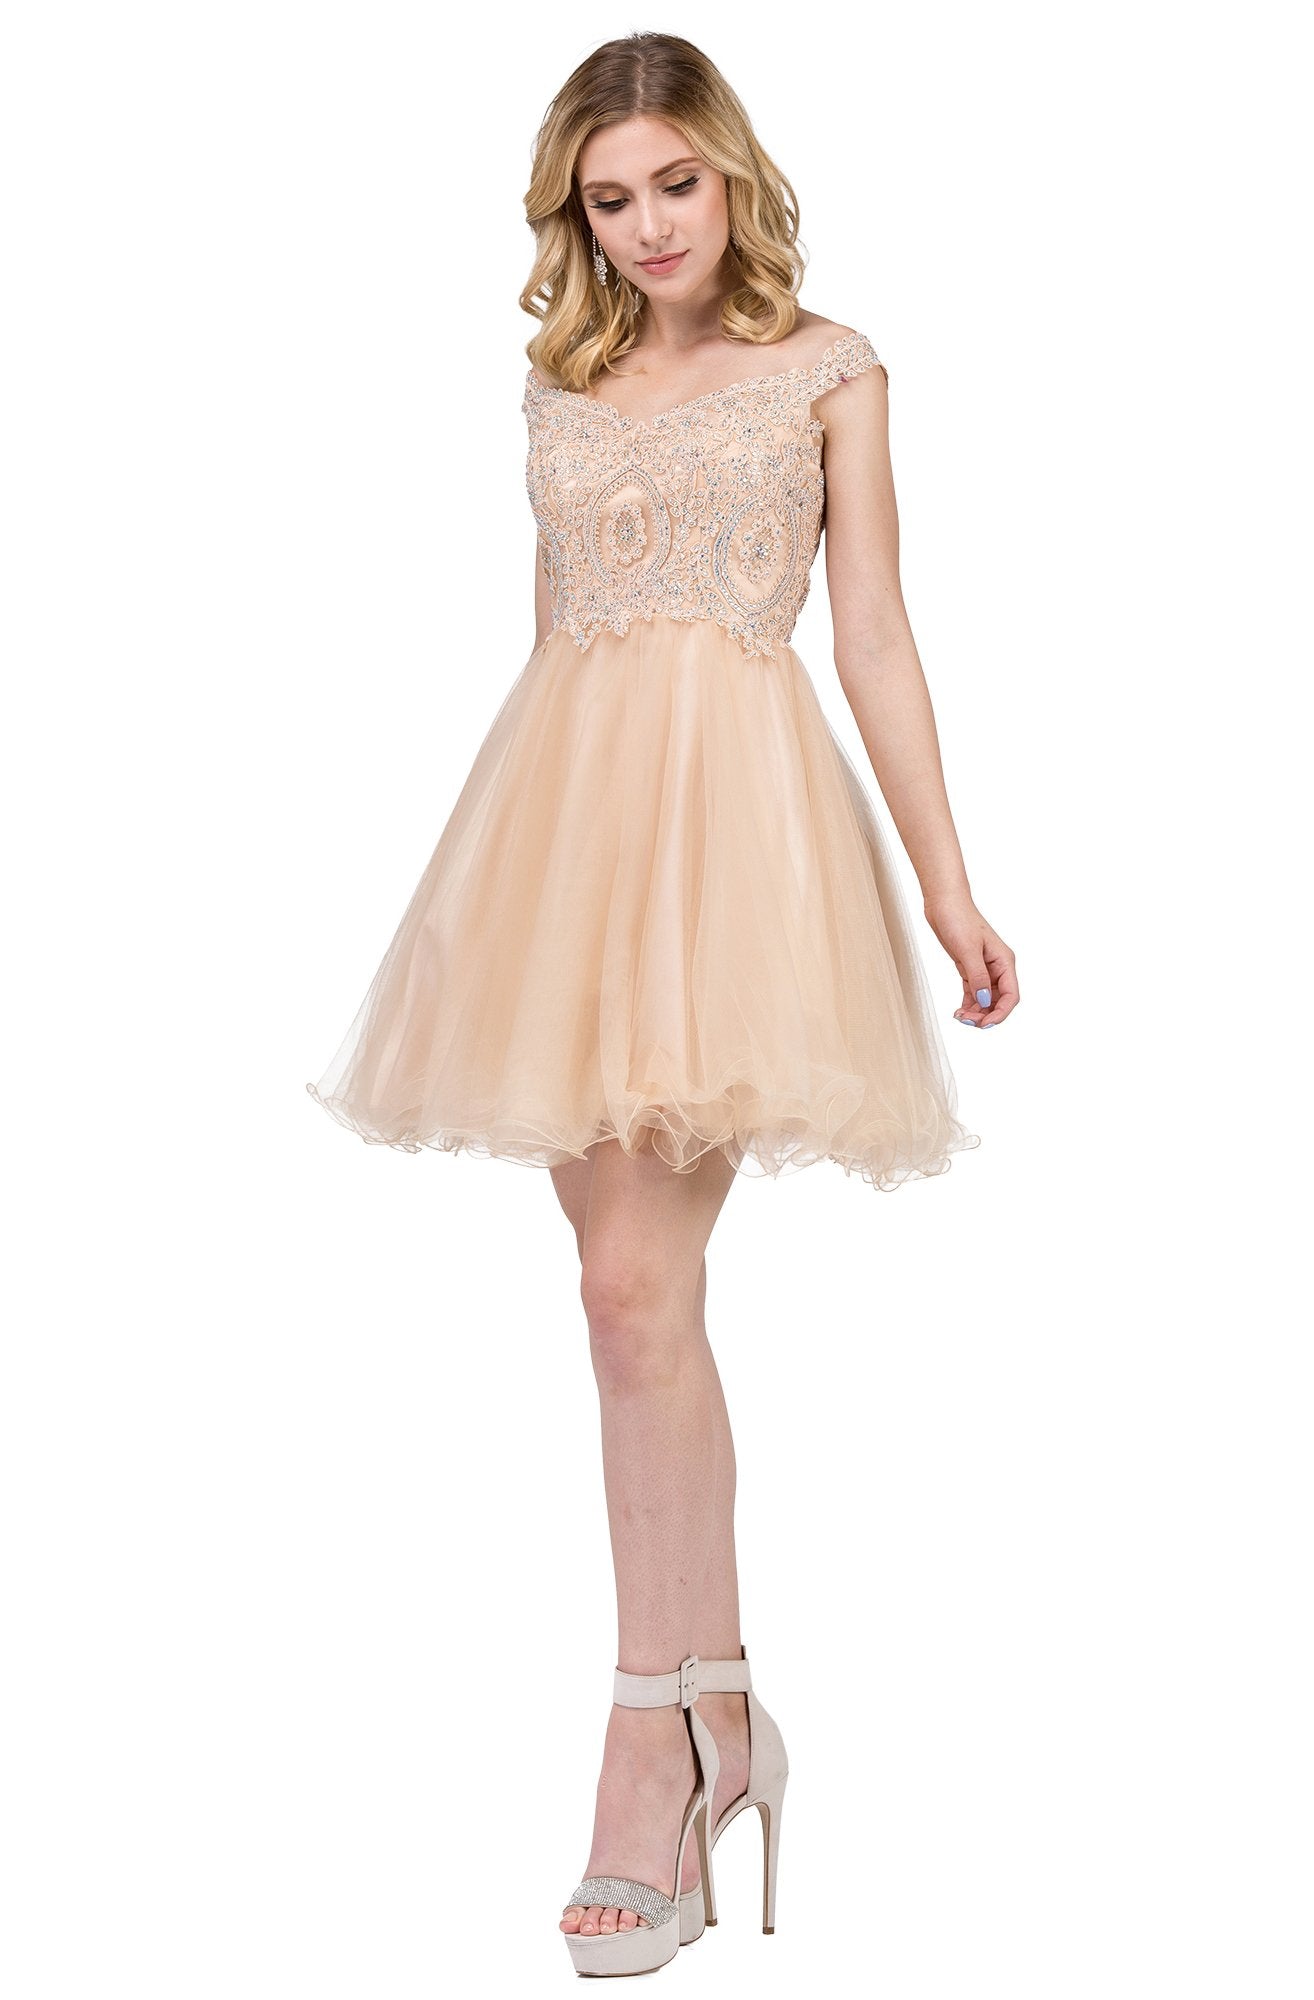 Dancing Queen - 3070 Beaded Lace Fit And Flare Cocktail Dress In Neutral and Yellow